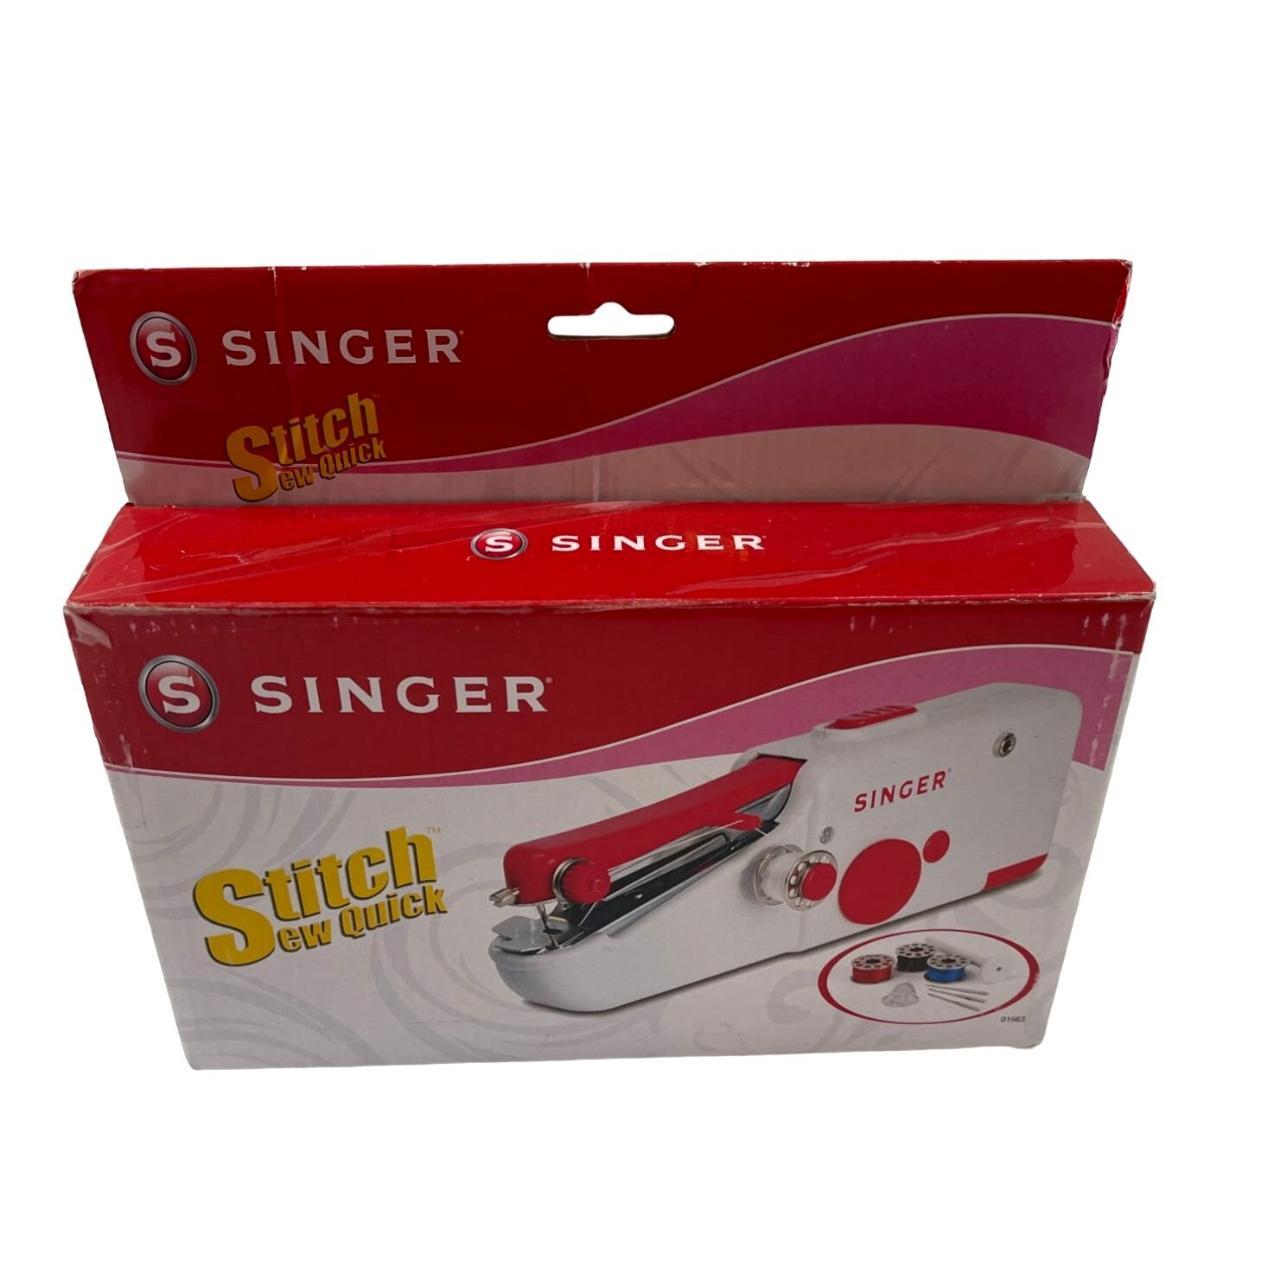 SINGER Hand Sewing Machine Mini Portable Stitch for Leather Jeans